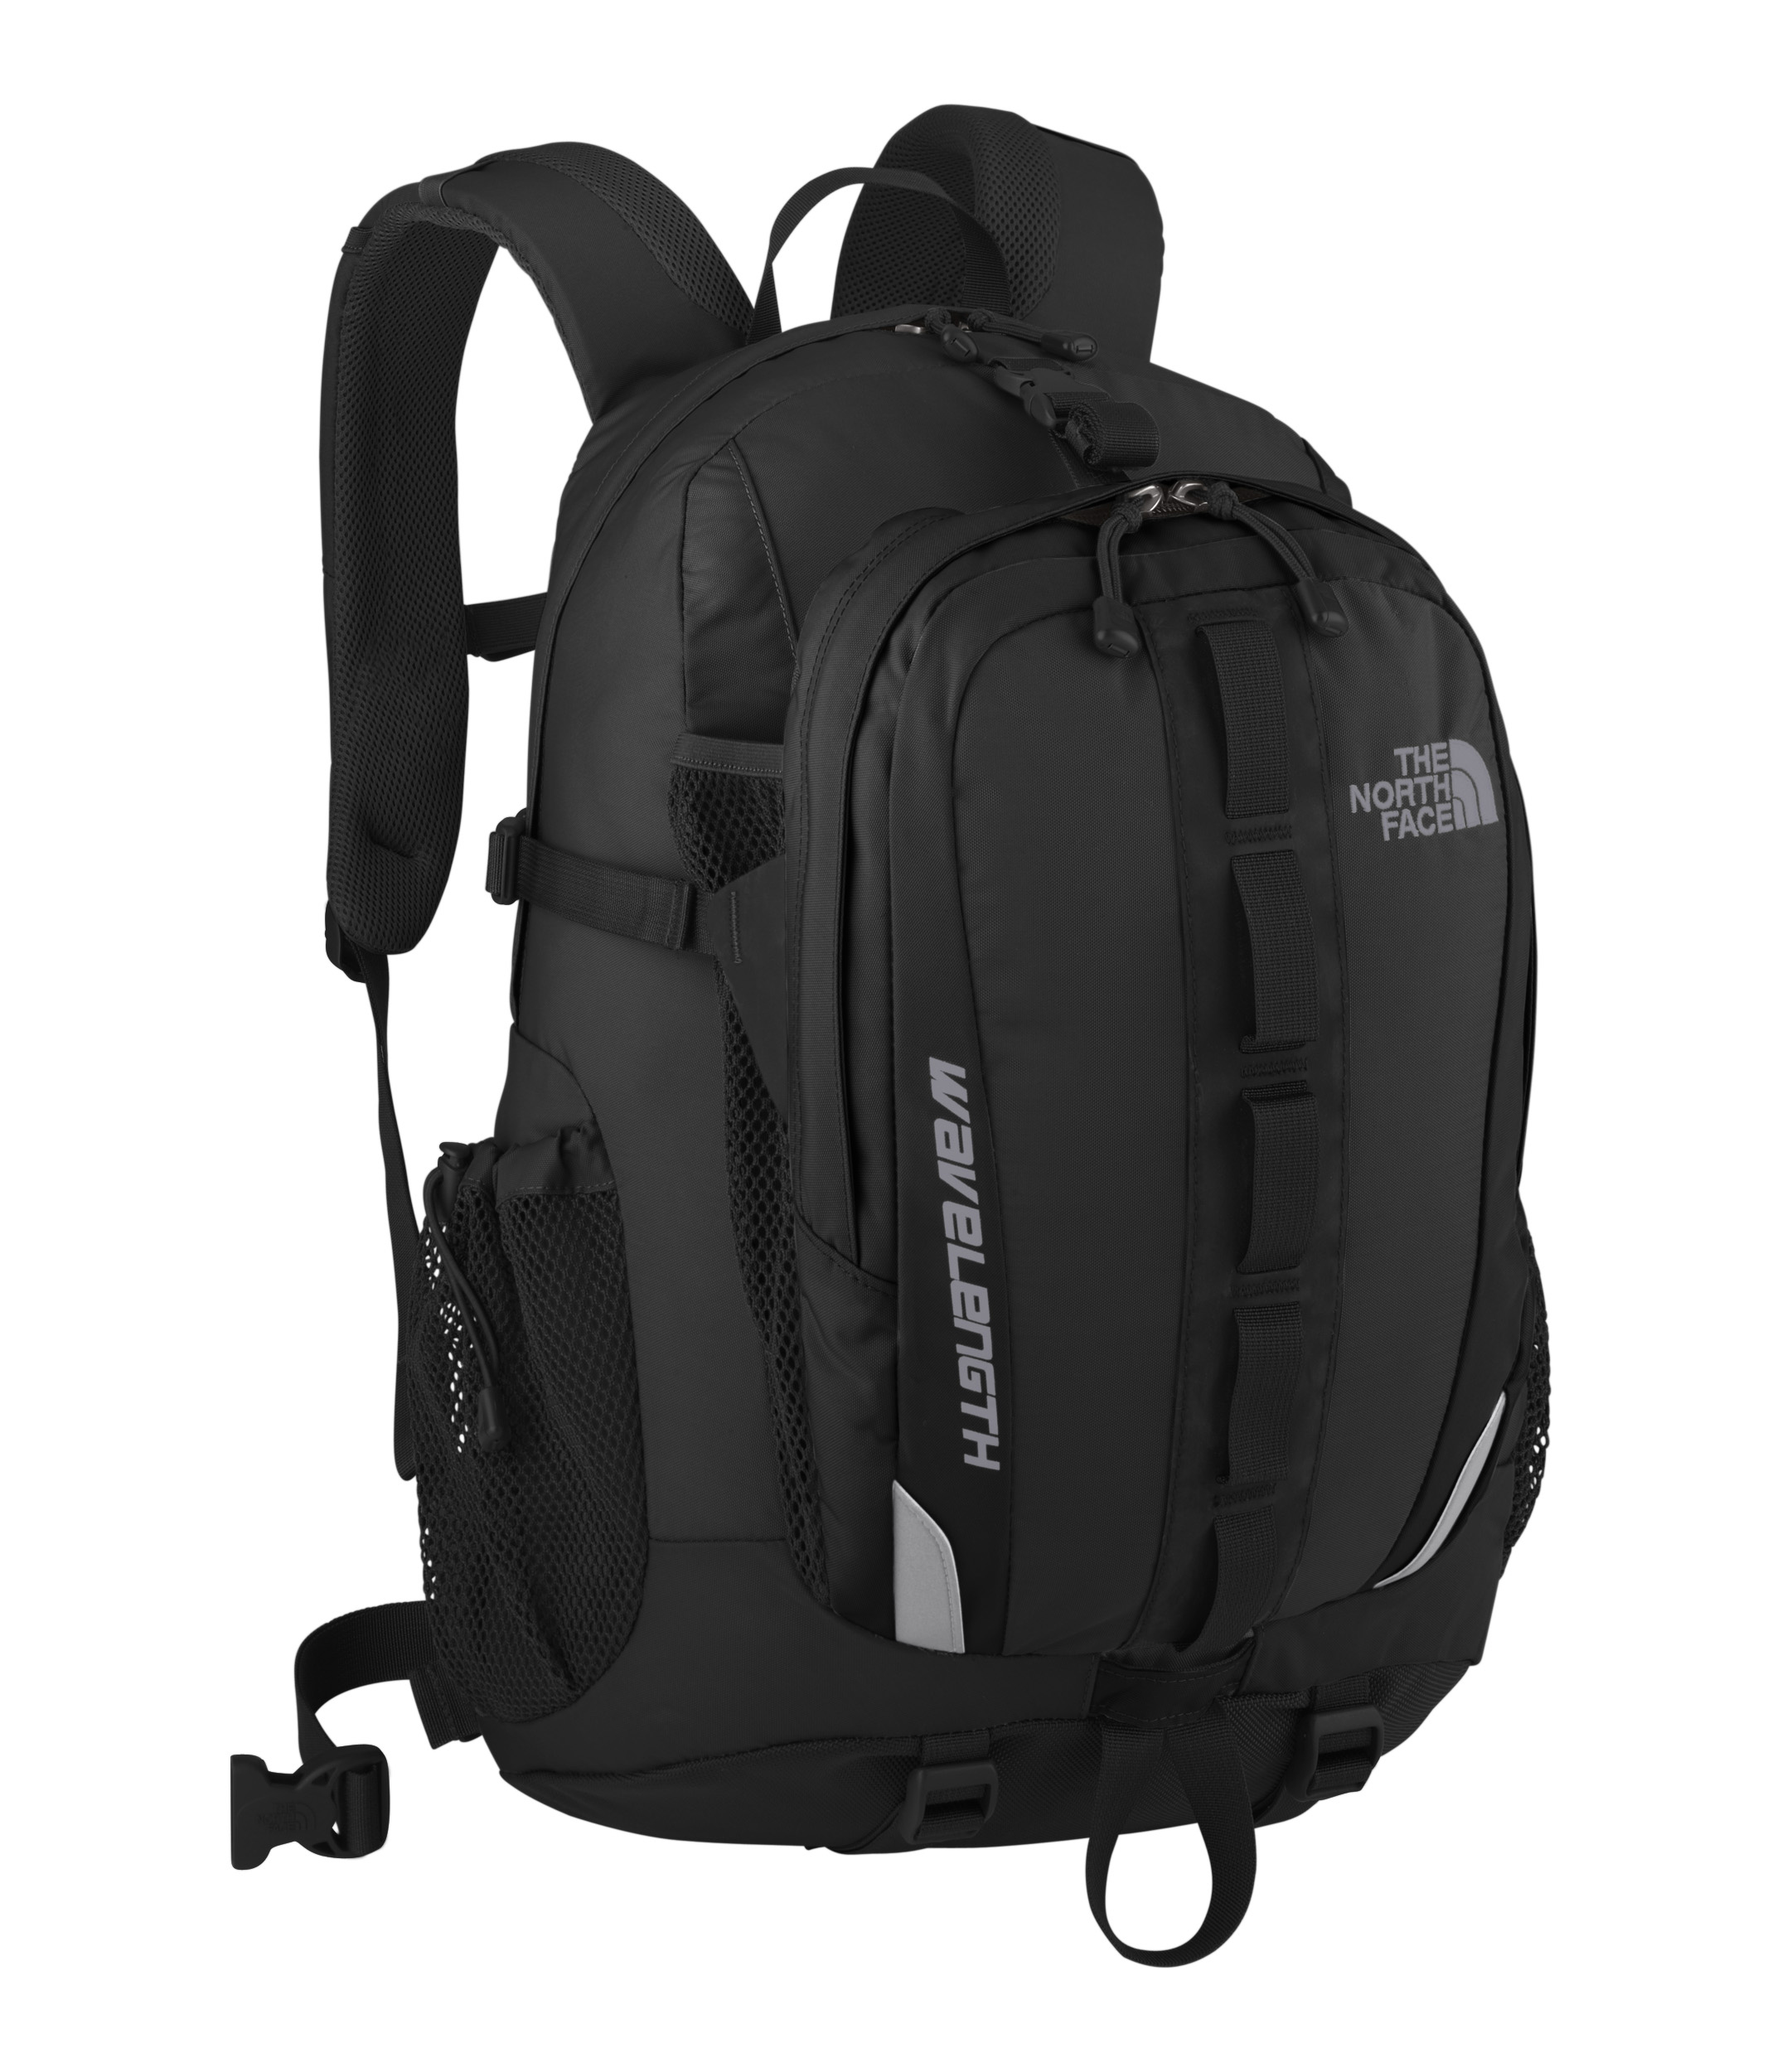 The North Face Wavelength Backpack 